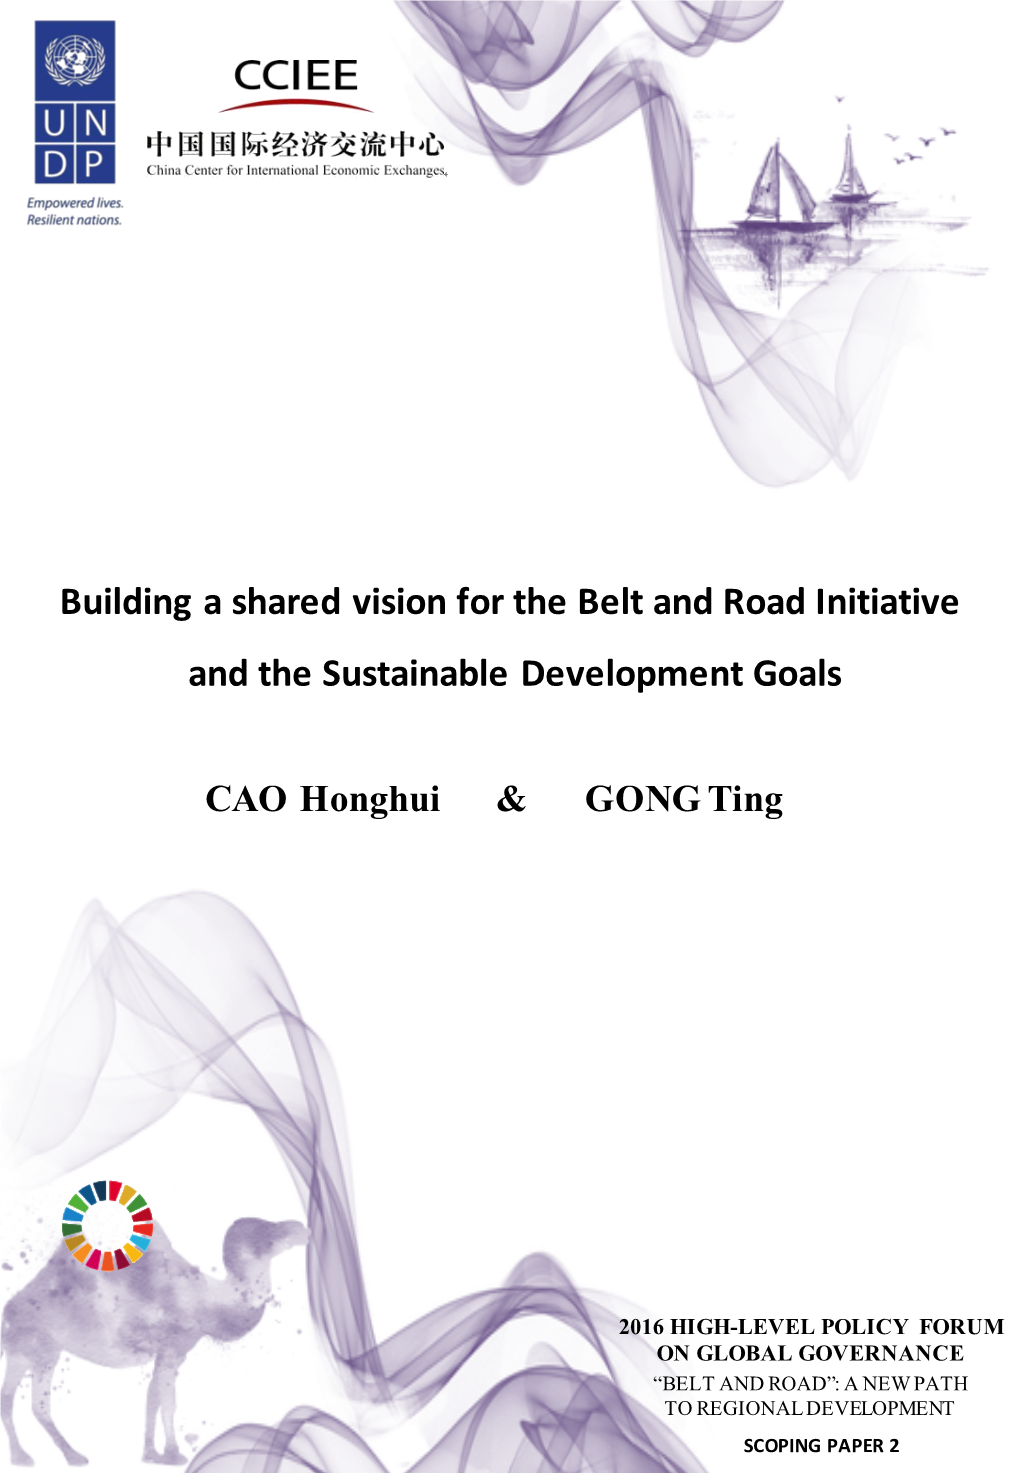 Building a Shared Vision for the Belt and Road Initiative and the Sustainable Development Goals